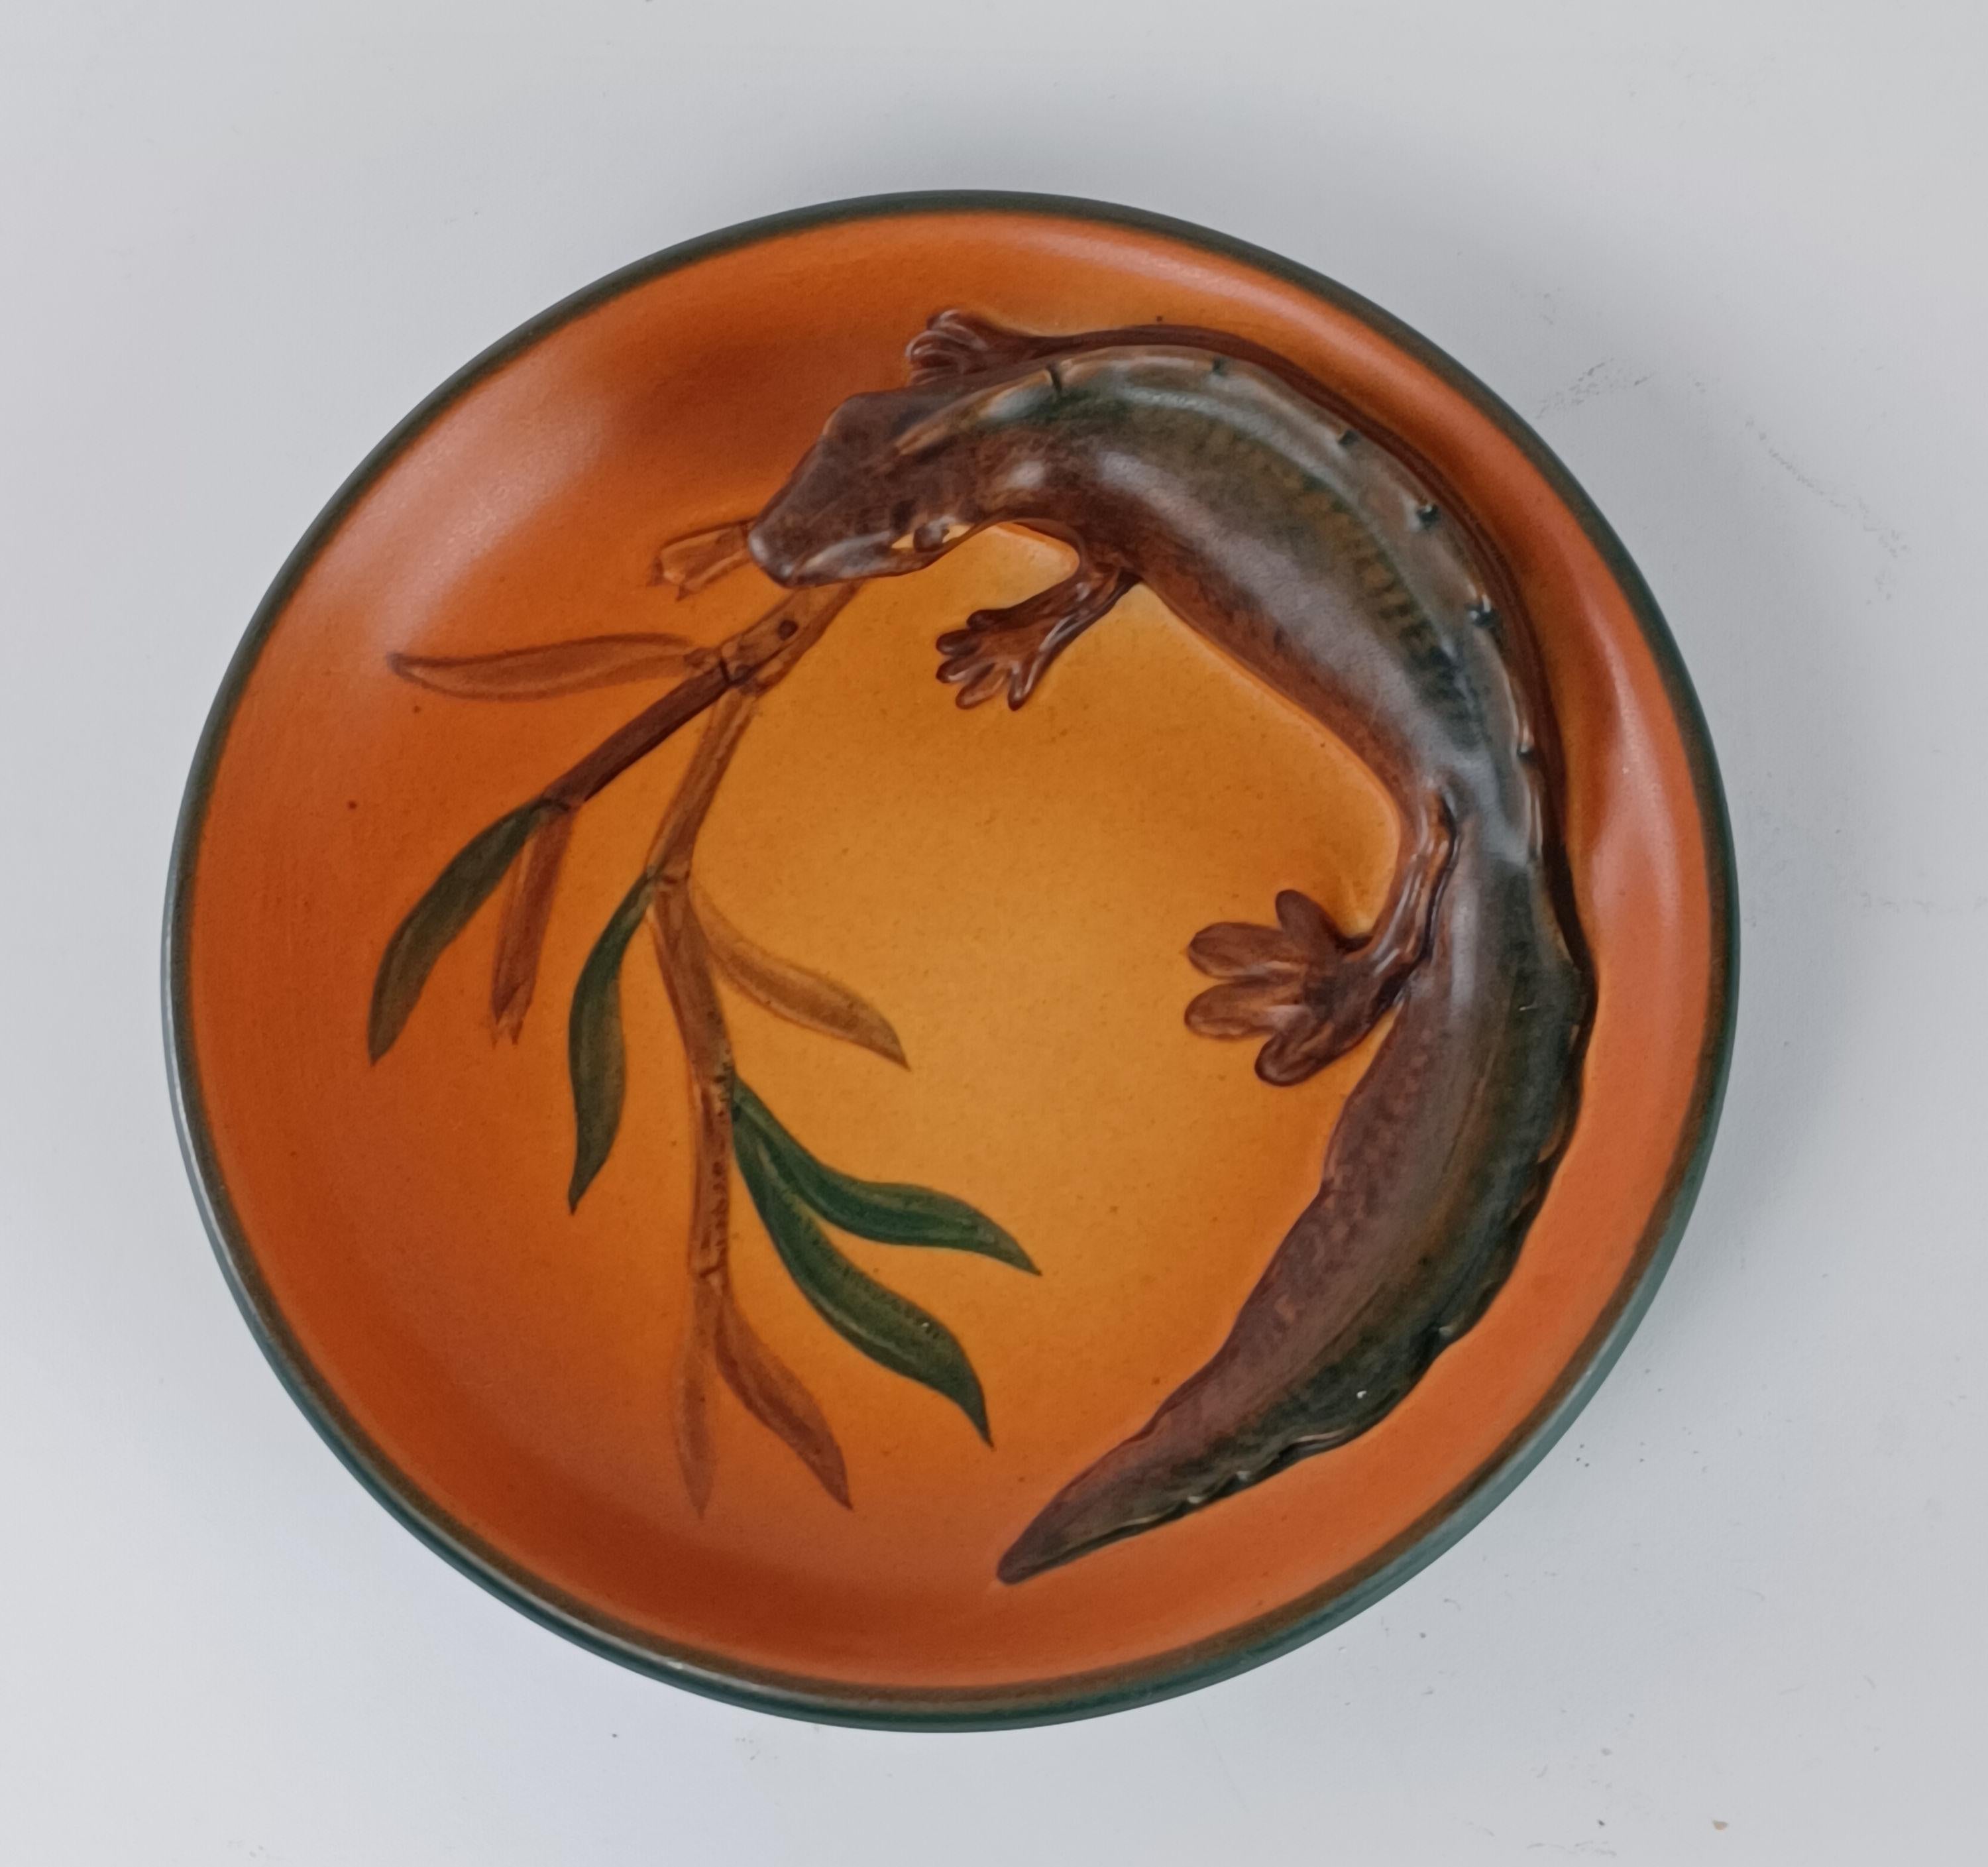 Early 20th Century 1920's Danish Art Nouveau Handcrafted Fish and Salamander Bowls by Ipsens Enke For Sale